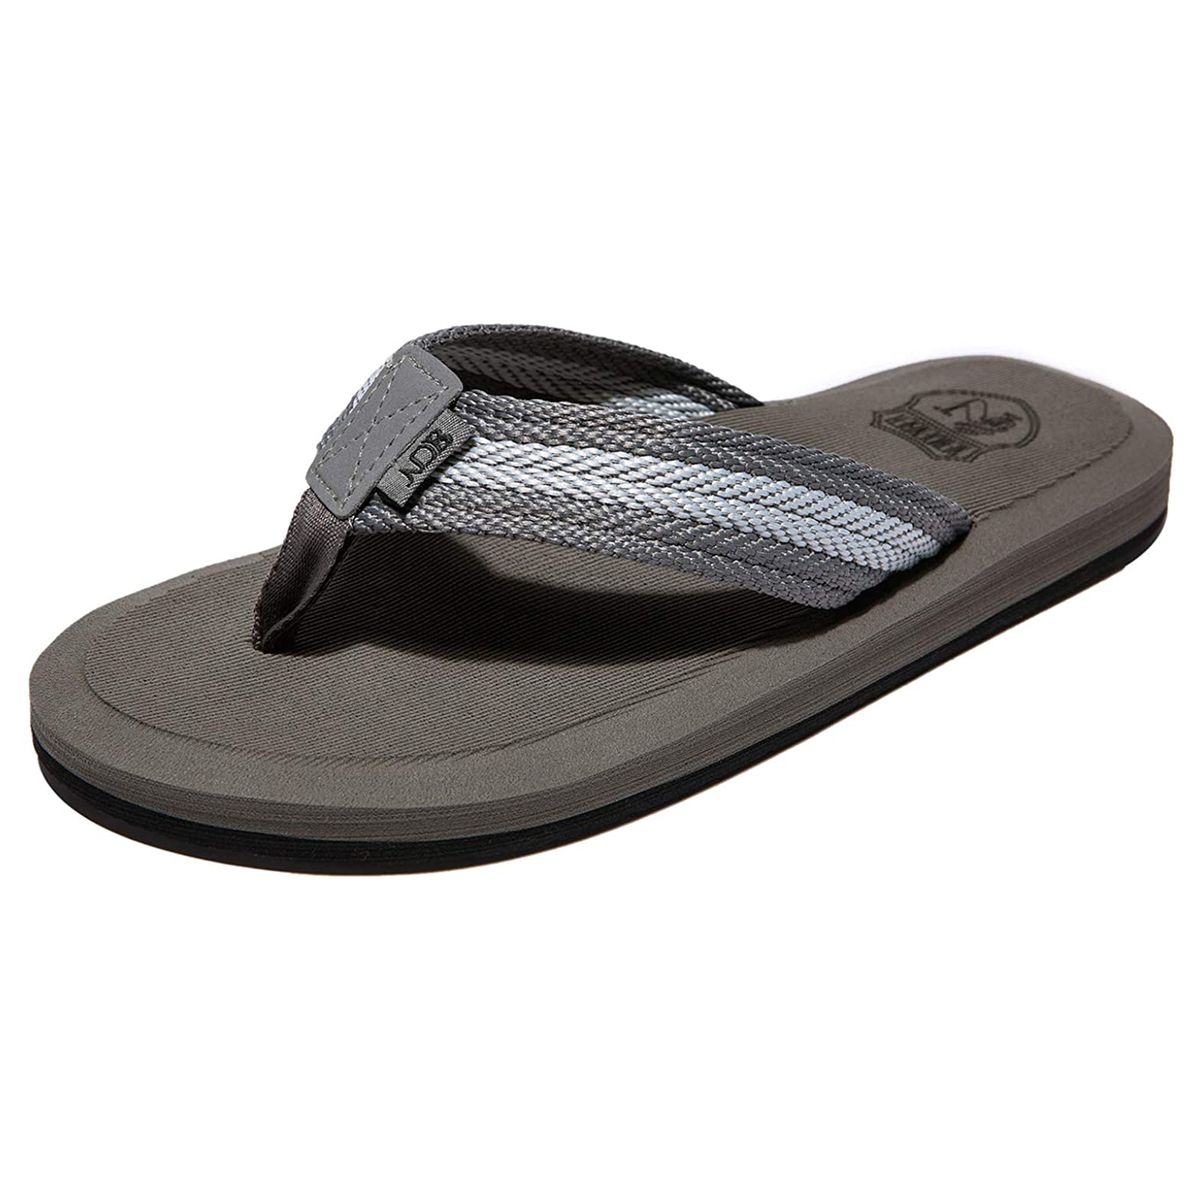 The 12 Most Comfortable Flip-flops, According to Customer Reviews ...